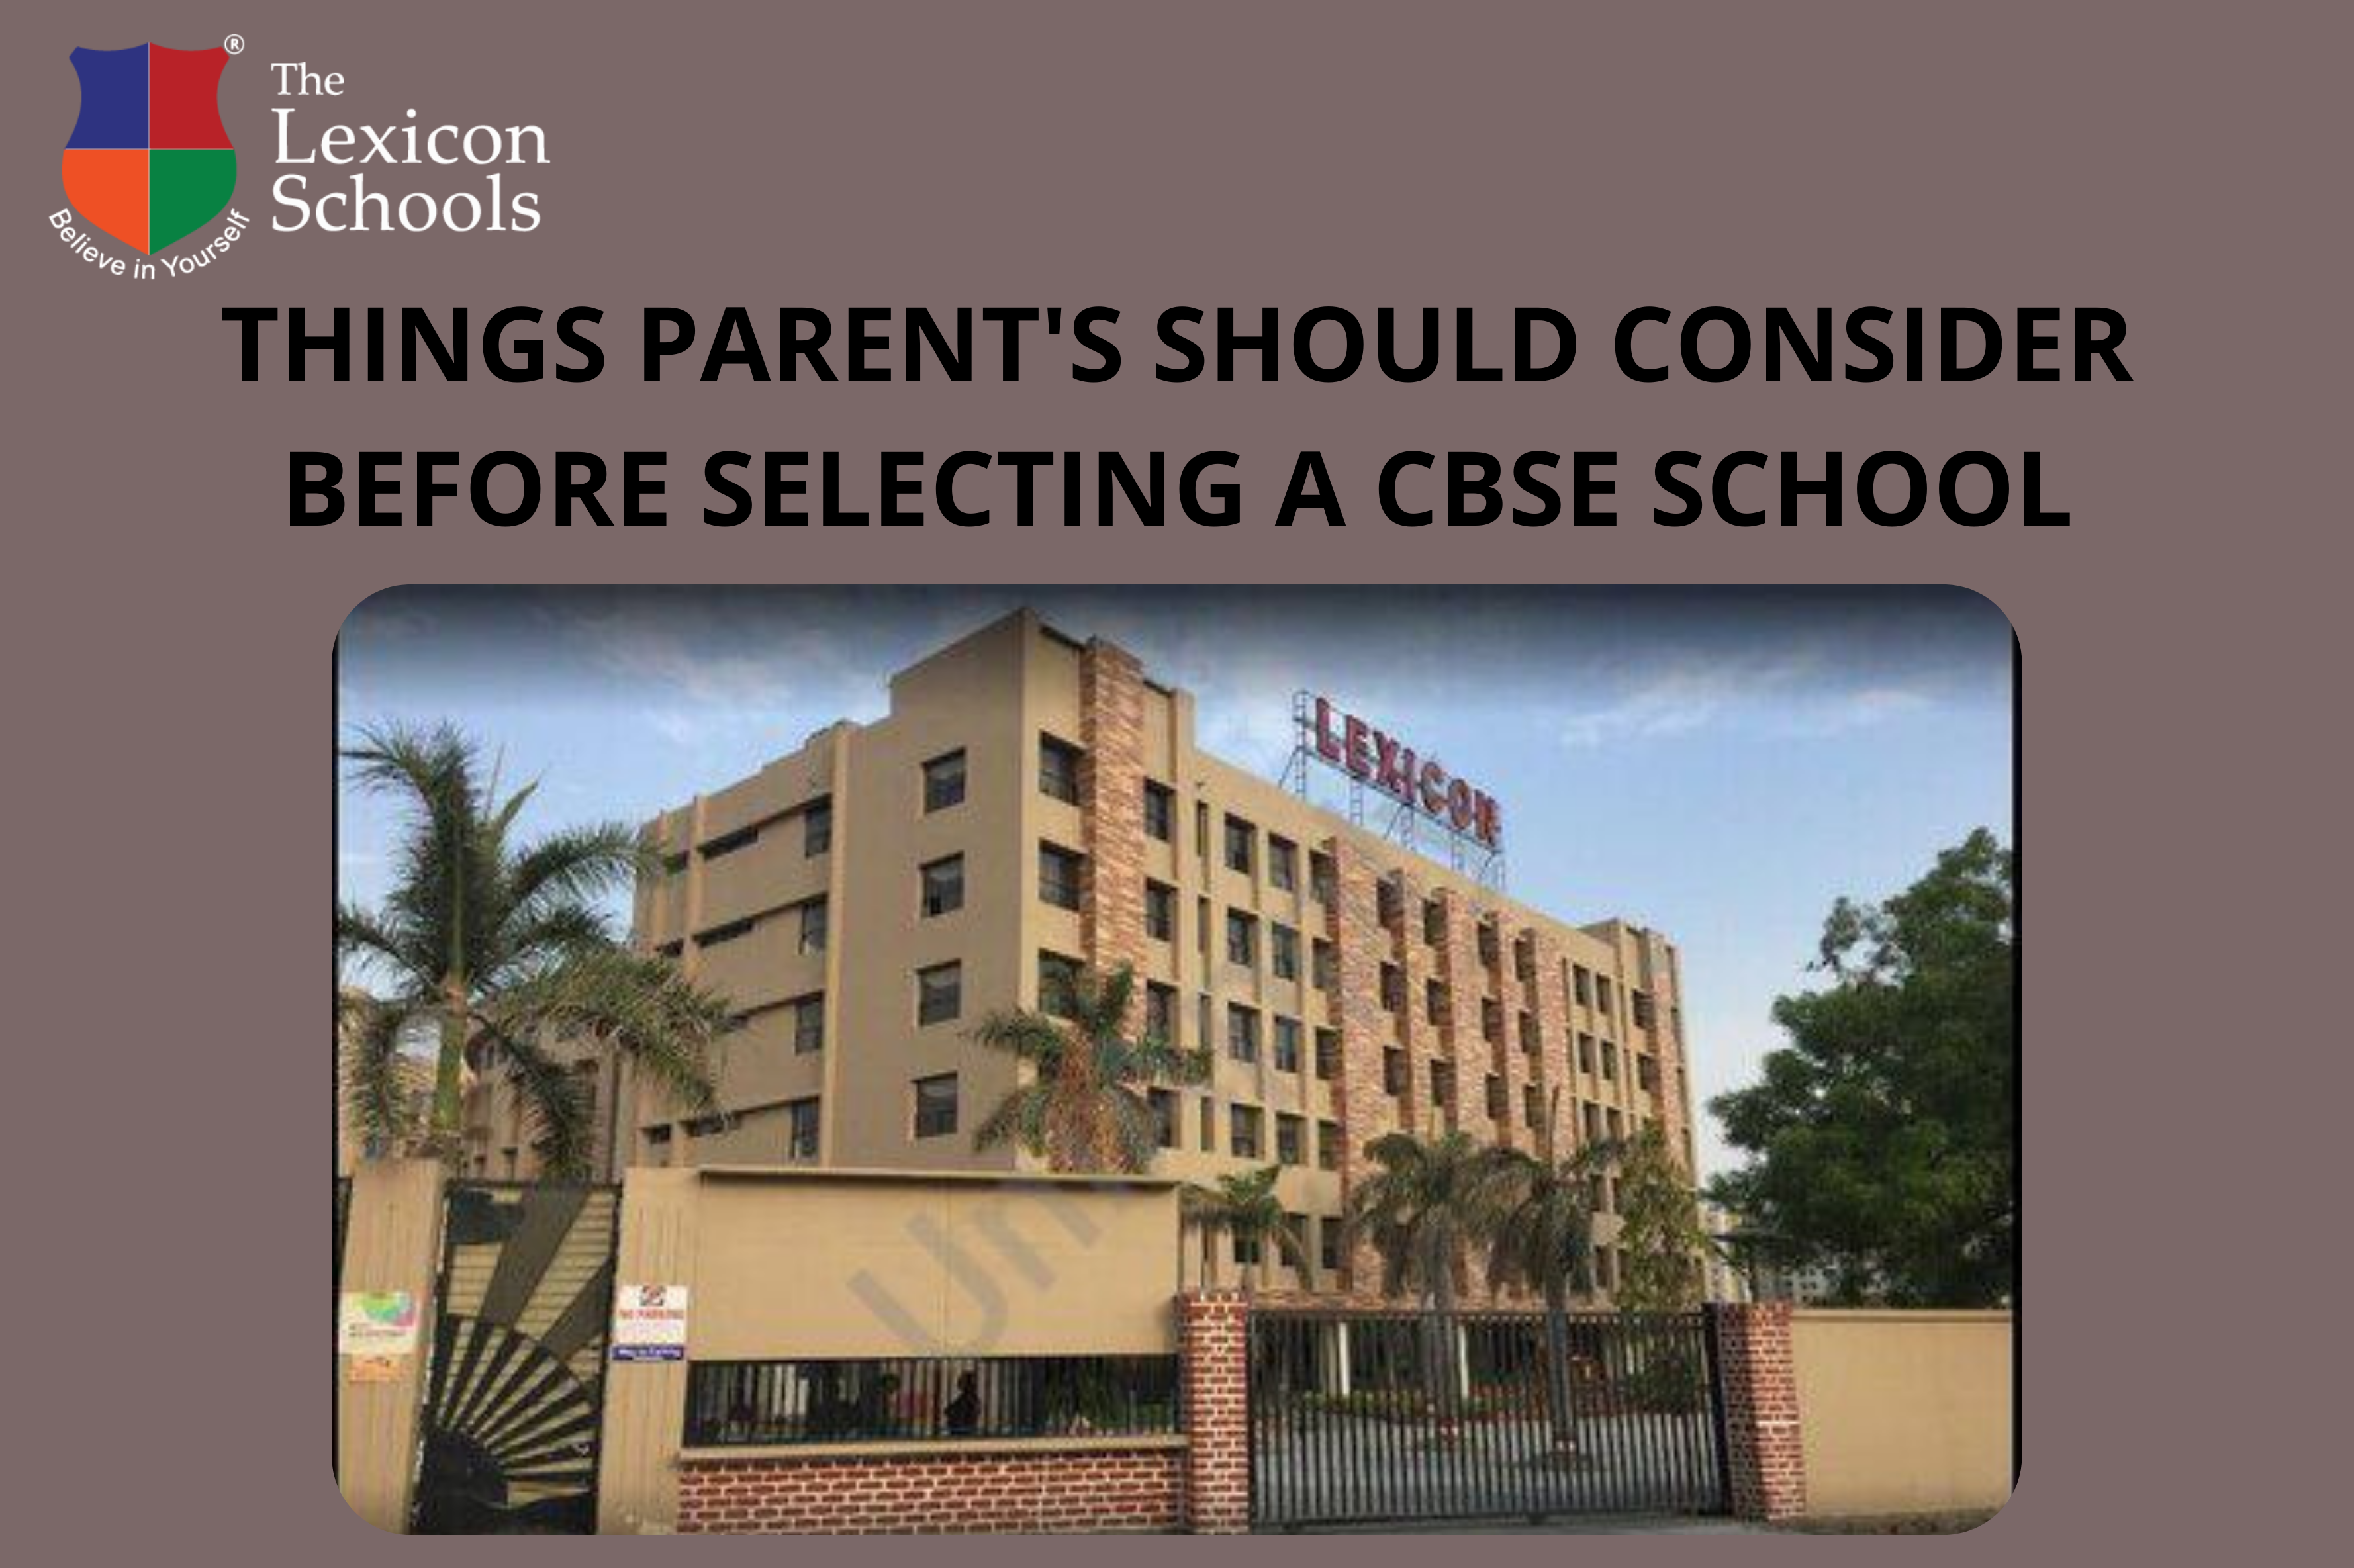 THINGS PARENTS SHOULD CONSIDER BEFORE SELECTING A CBSE SCHOOL